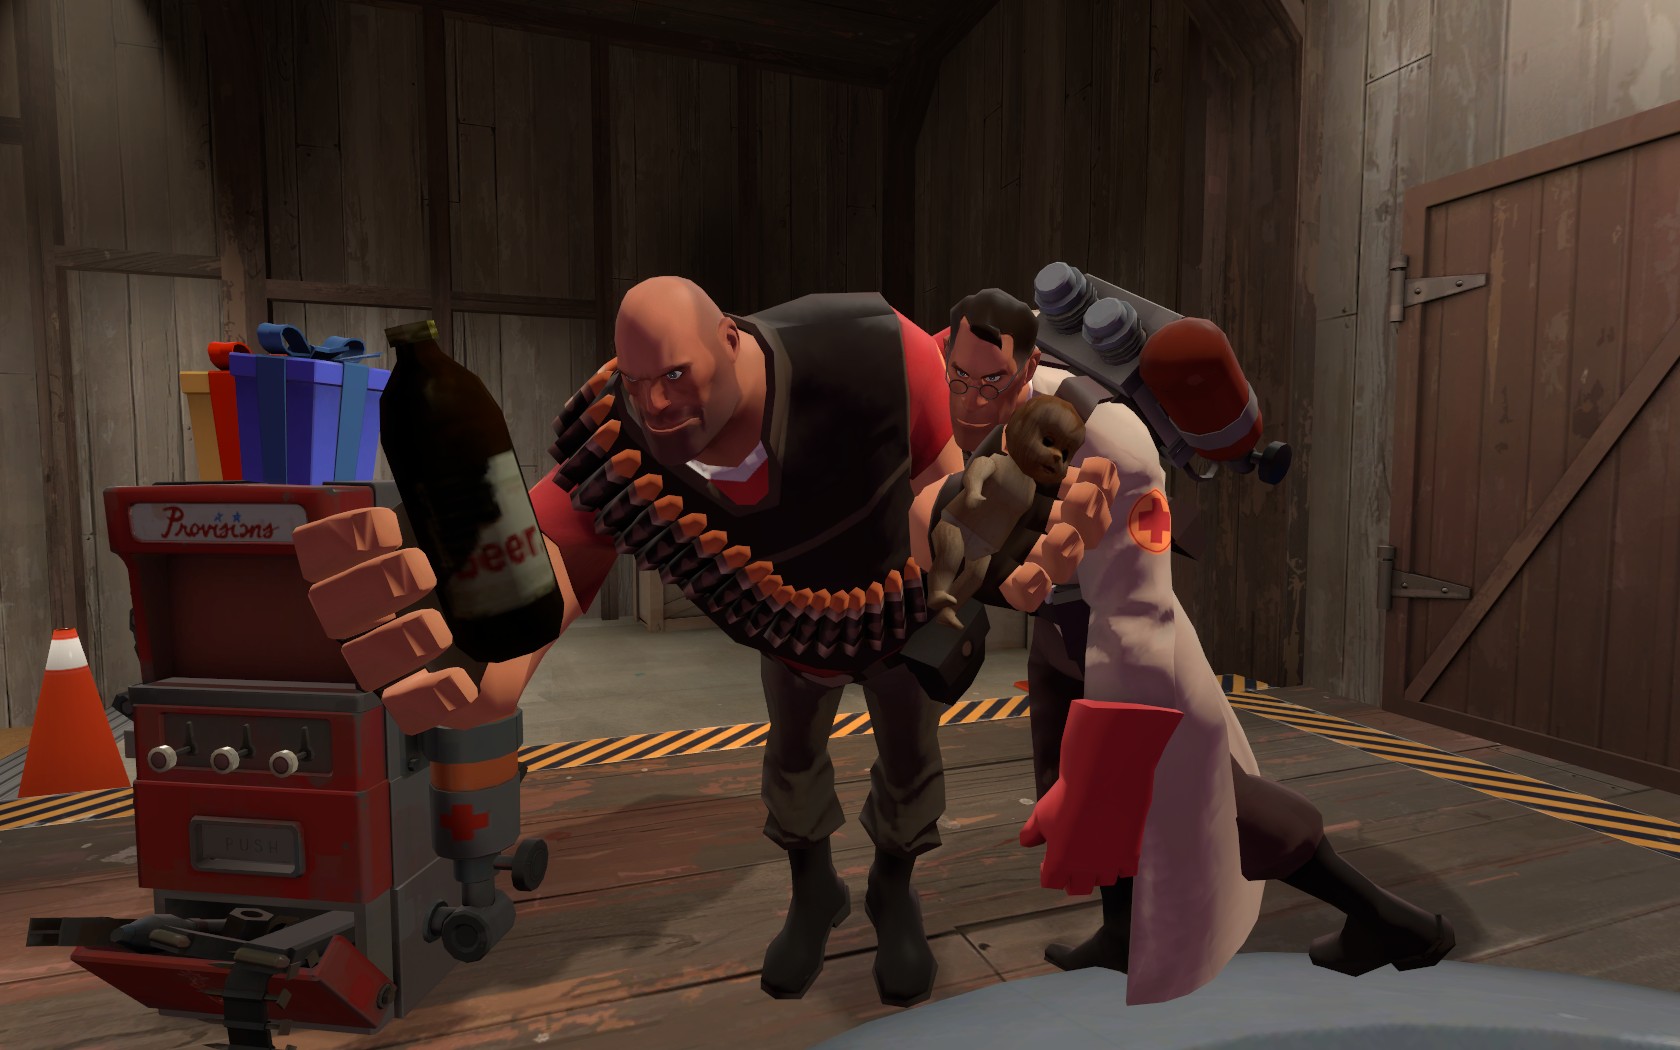 the medic is drunk so he is leaning on the heavy to keep balence